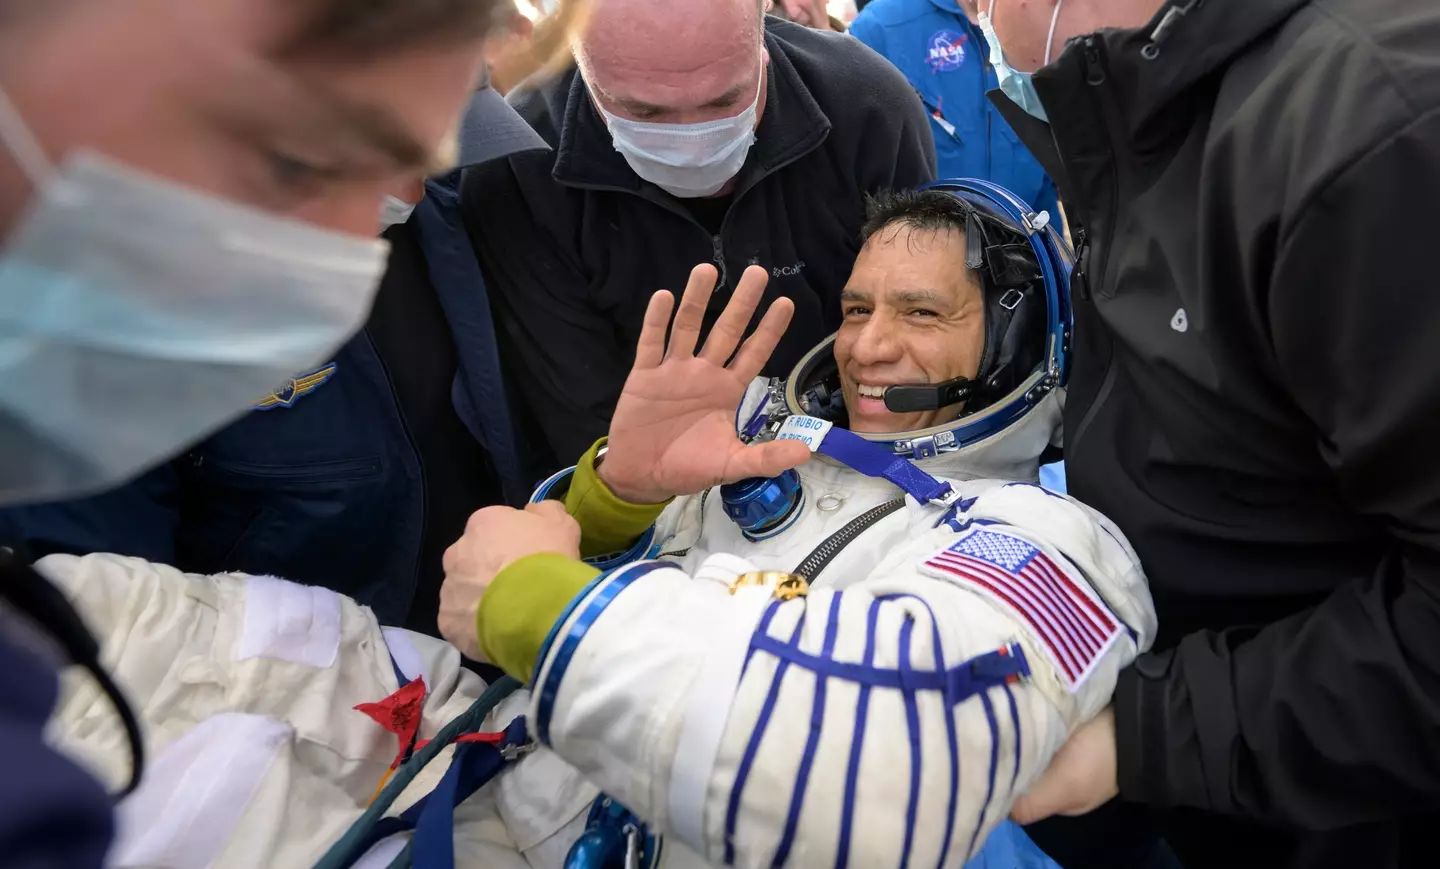 Frank Rubio returned from his time in space last year.